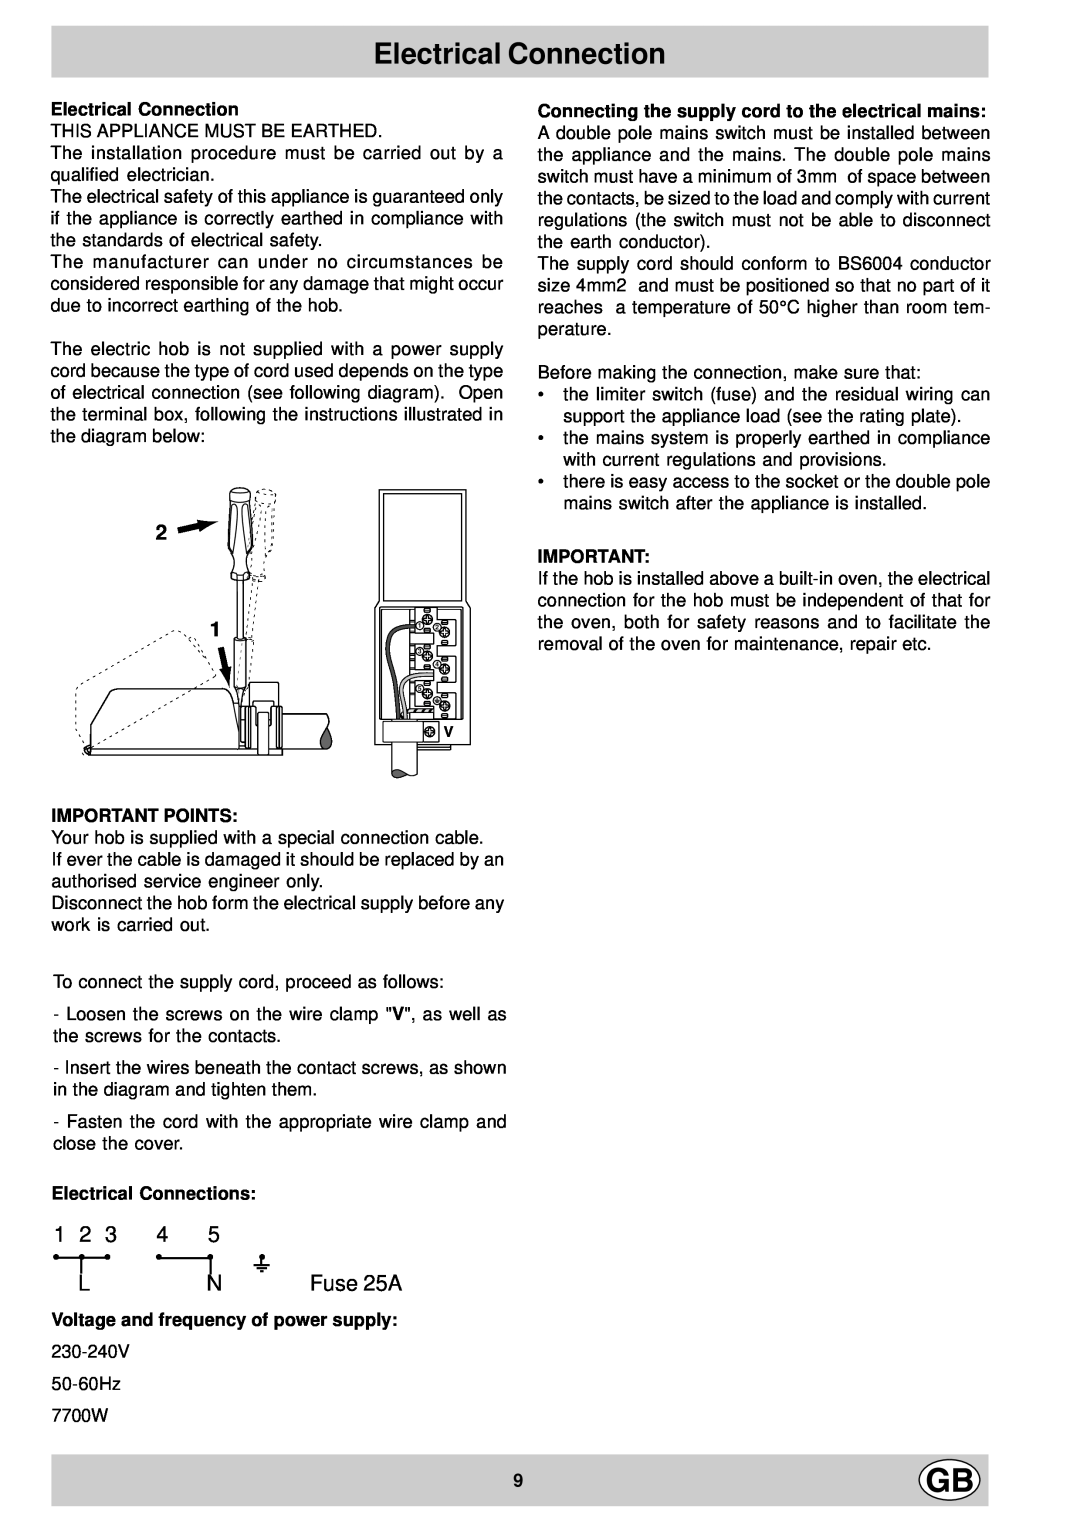 Hotpoint EX901X manual Fuse 25A, Important Points, Electrical Connections, Voltage and frequency of power supply 